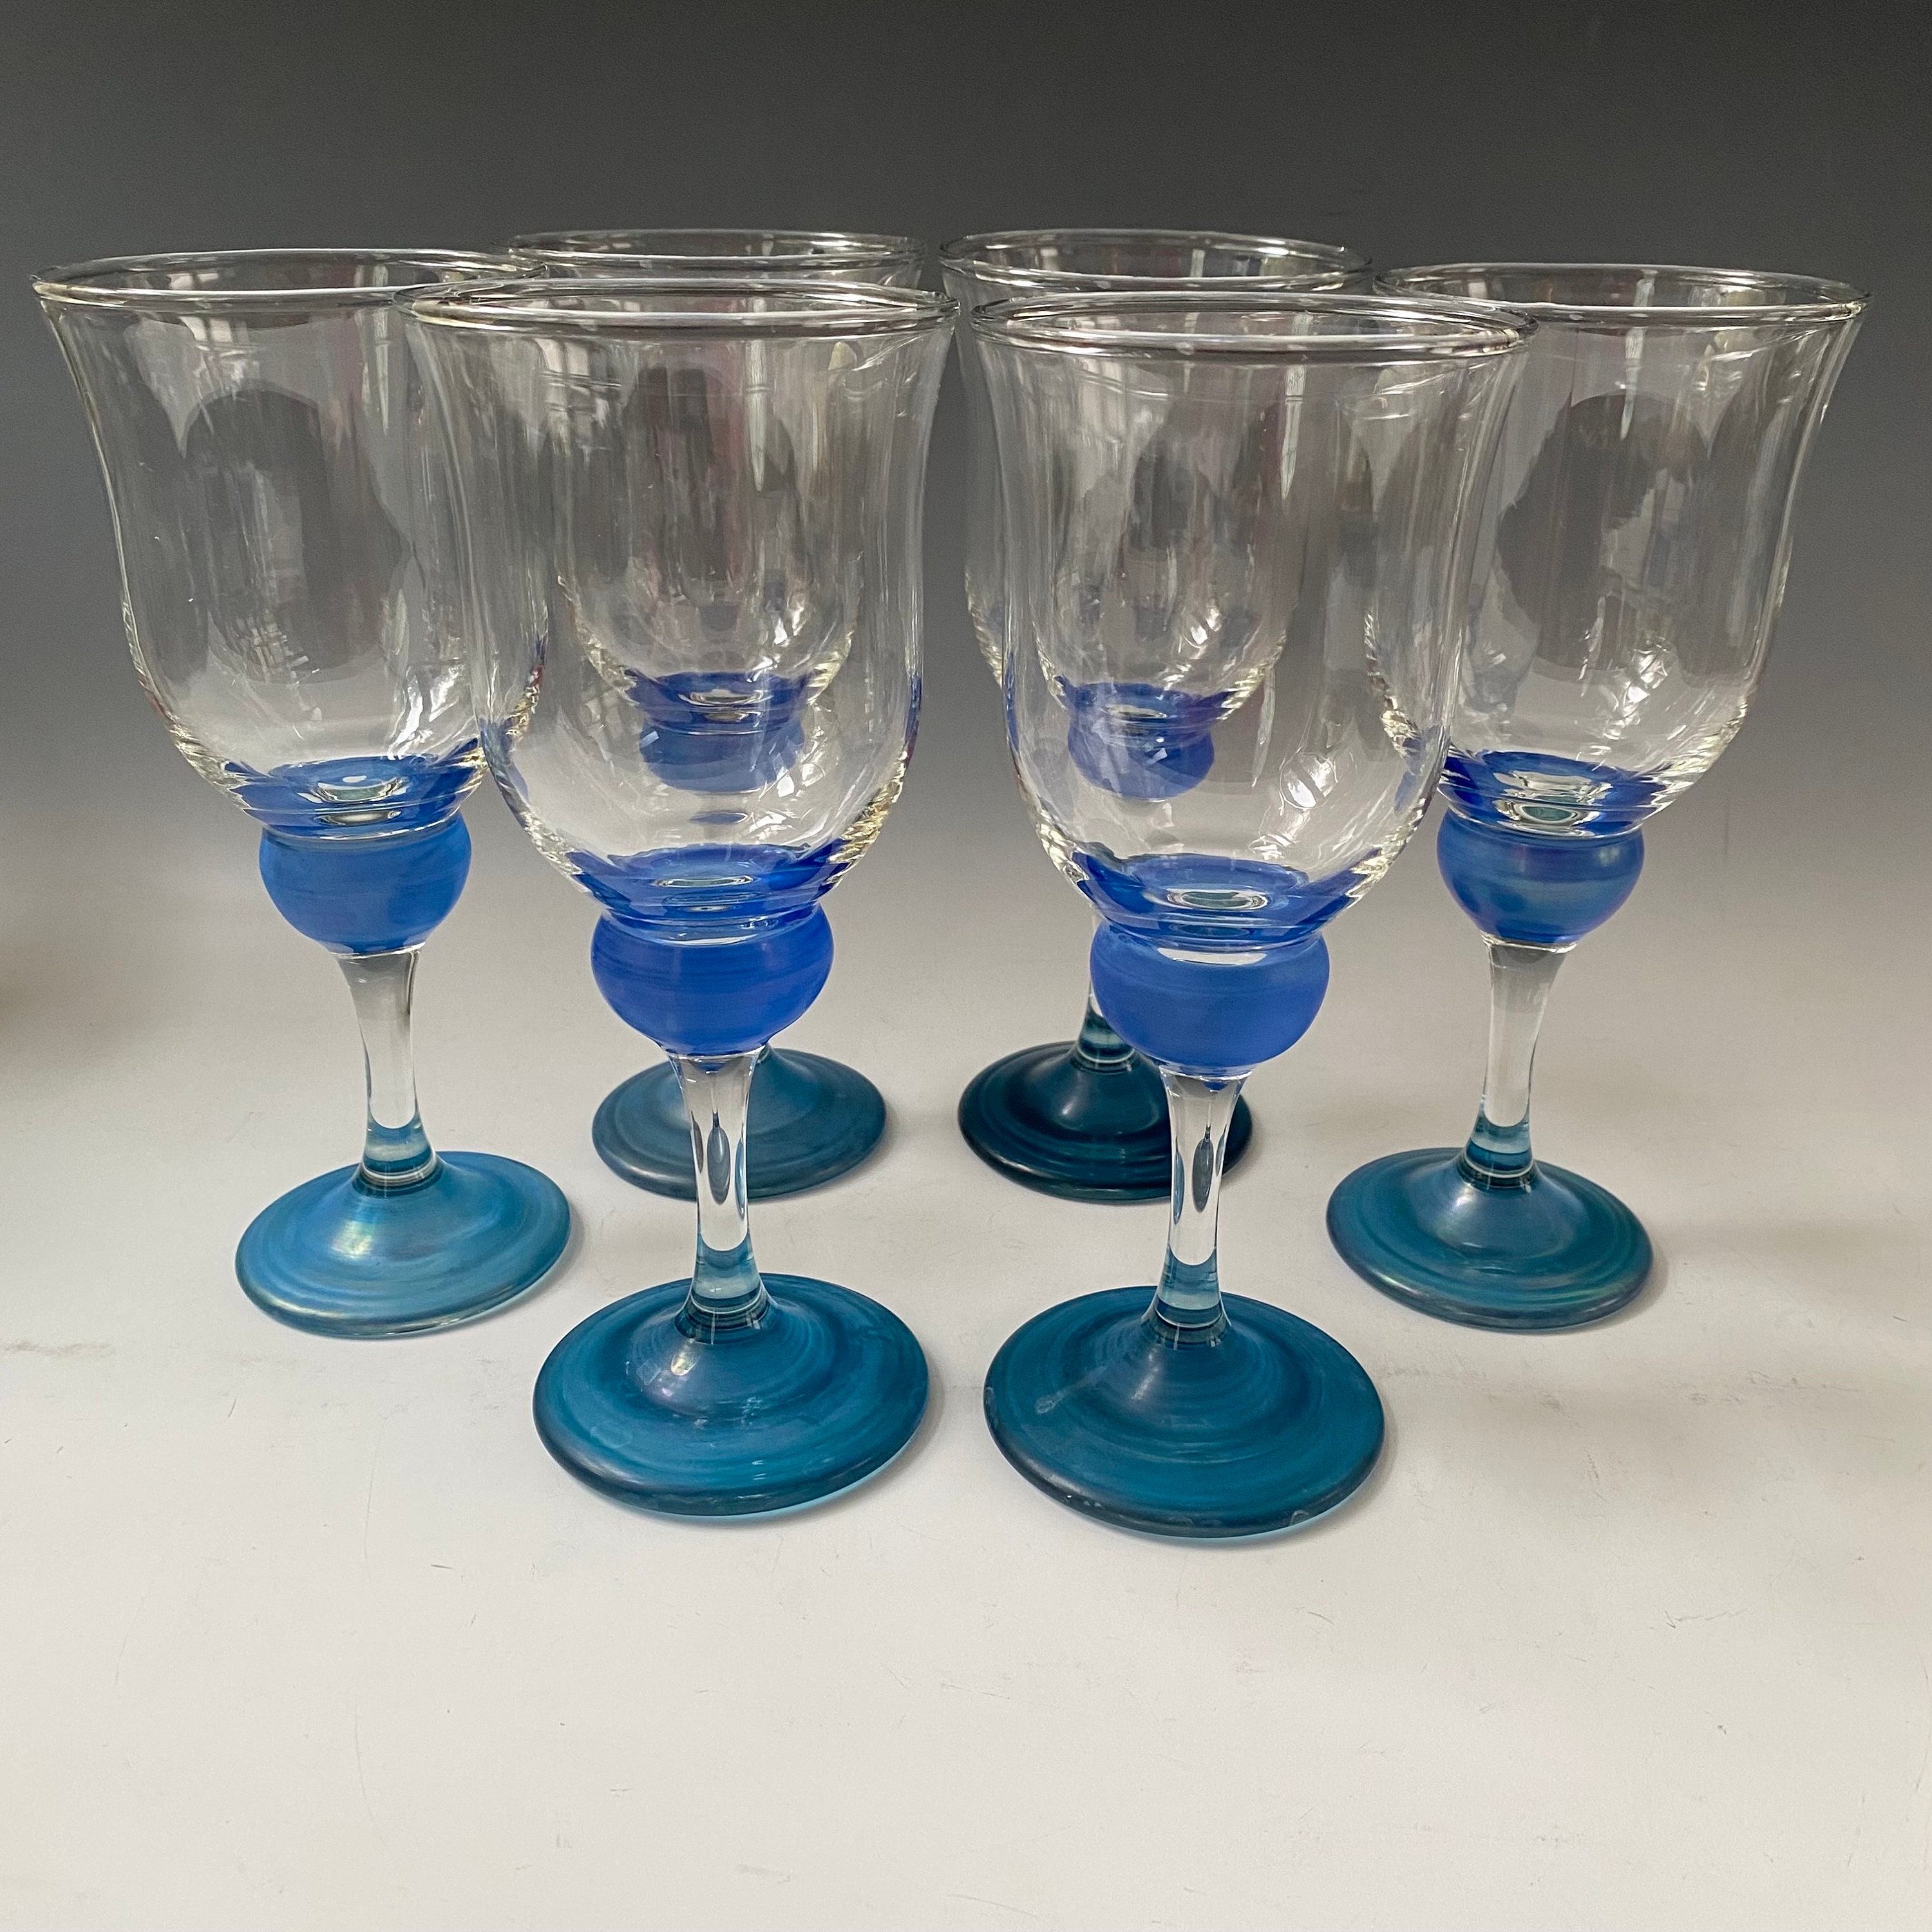 Ada 08 Set of 6 Water Glasses with Stem